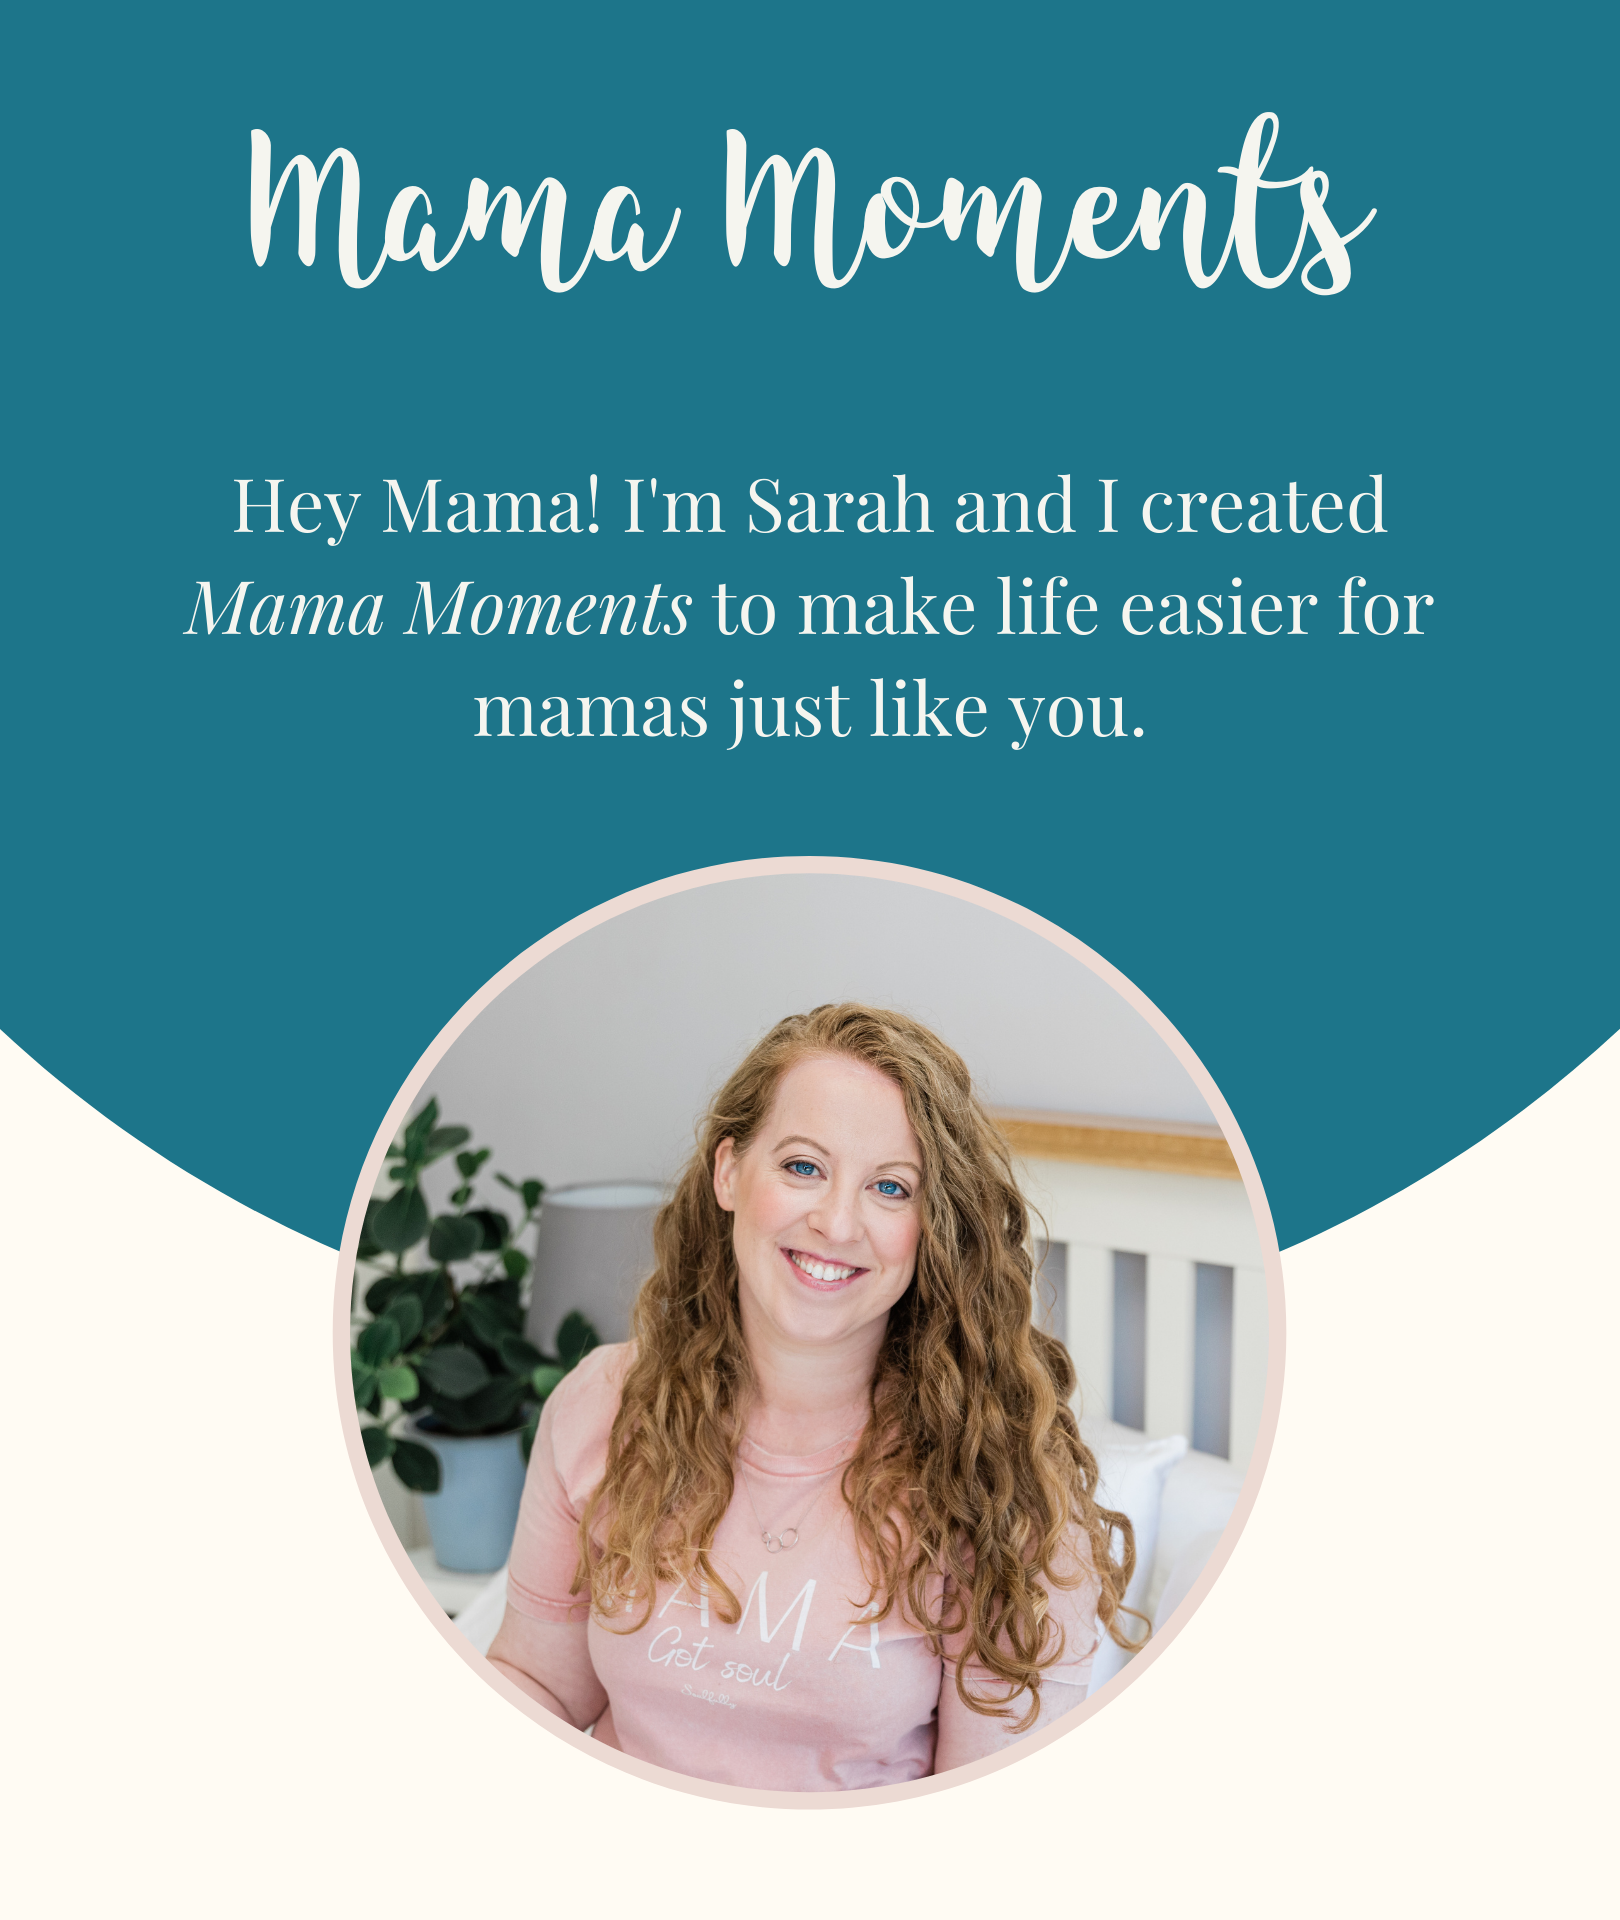 1579-mama-moments-ig-bio-page-540-×-640px-2.png